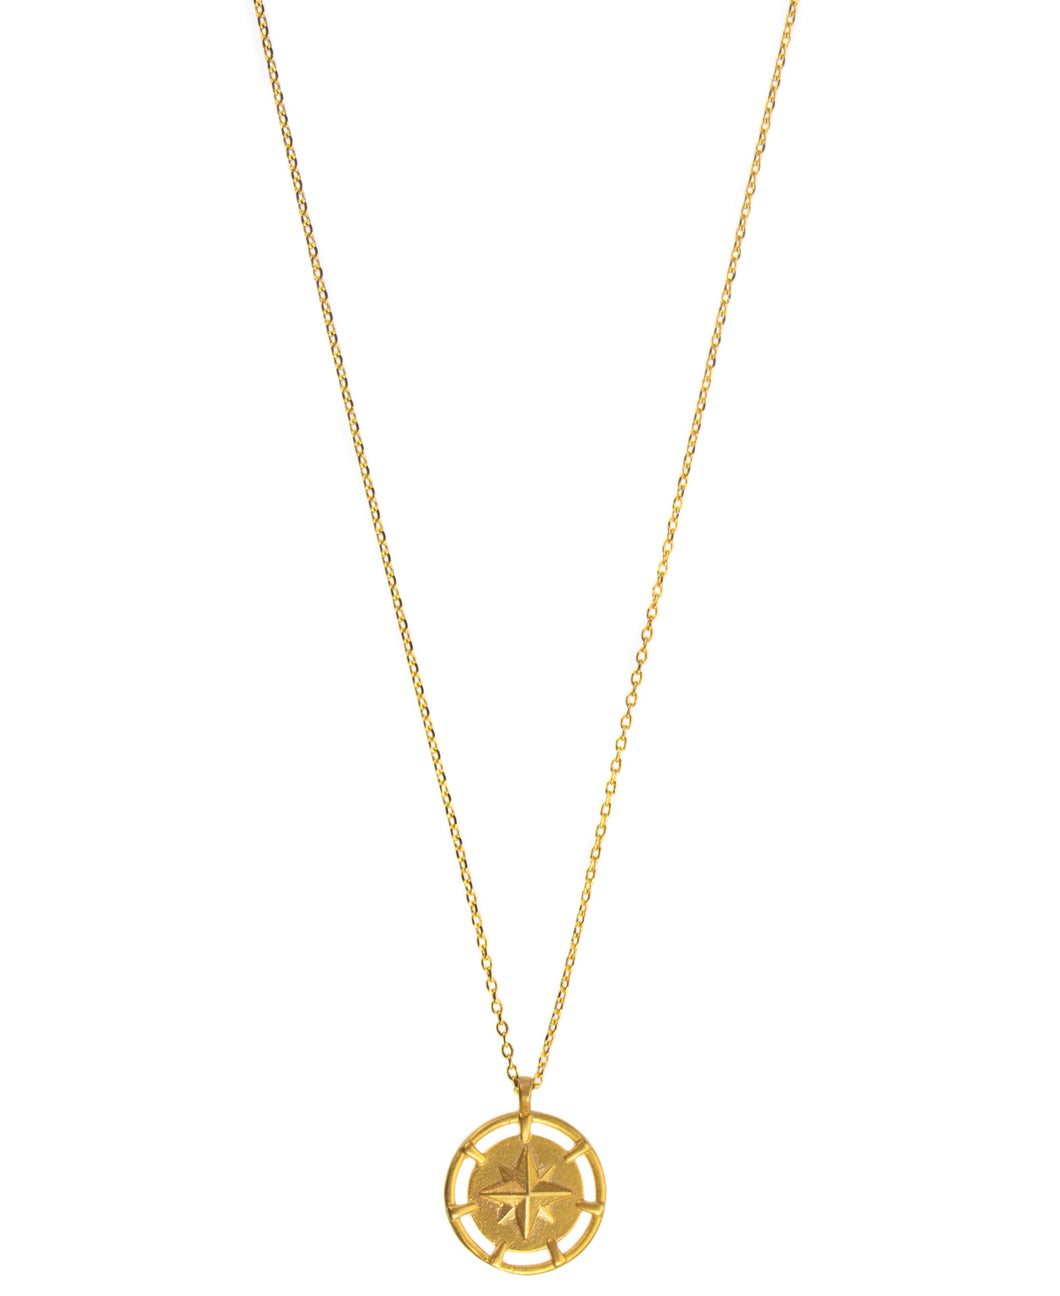 Hultquist North Star Necklace